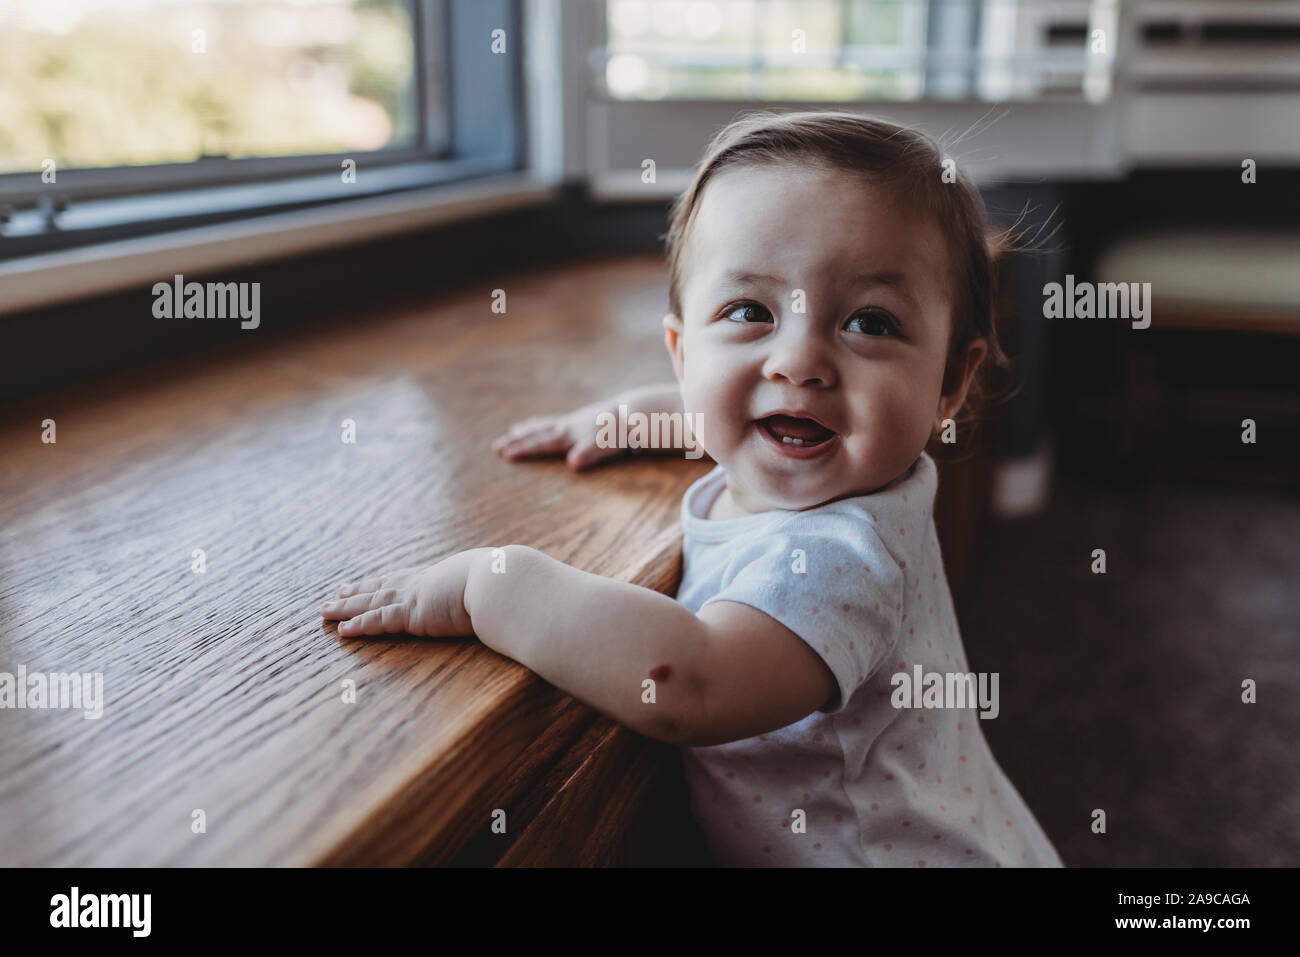 Happy baby with first teeth holding herself upright near window Stock Photo